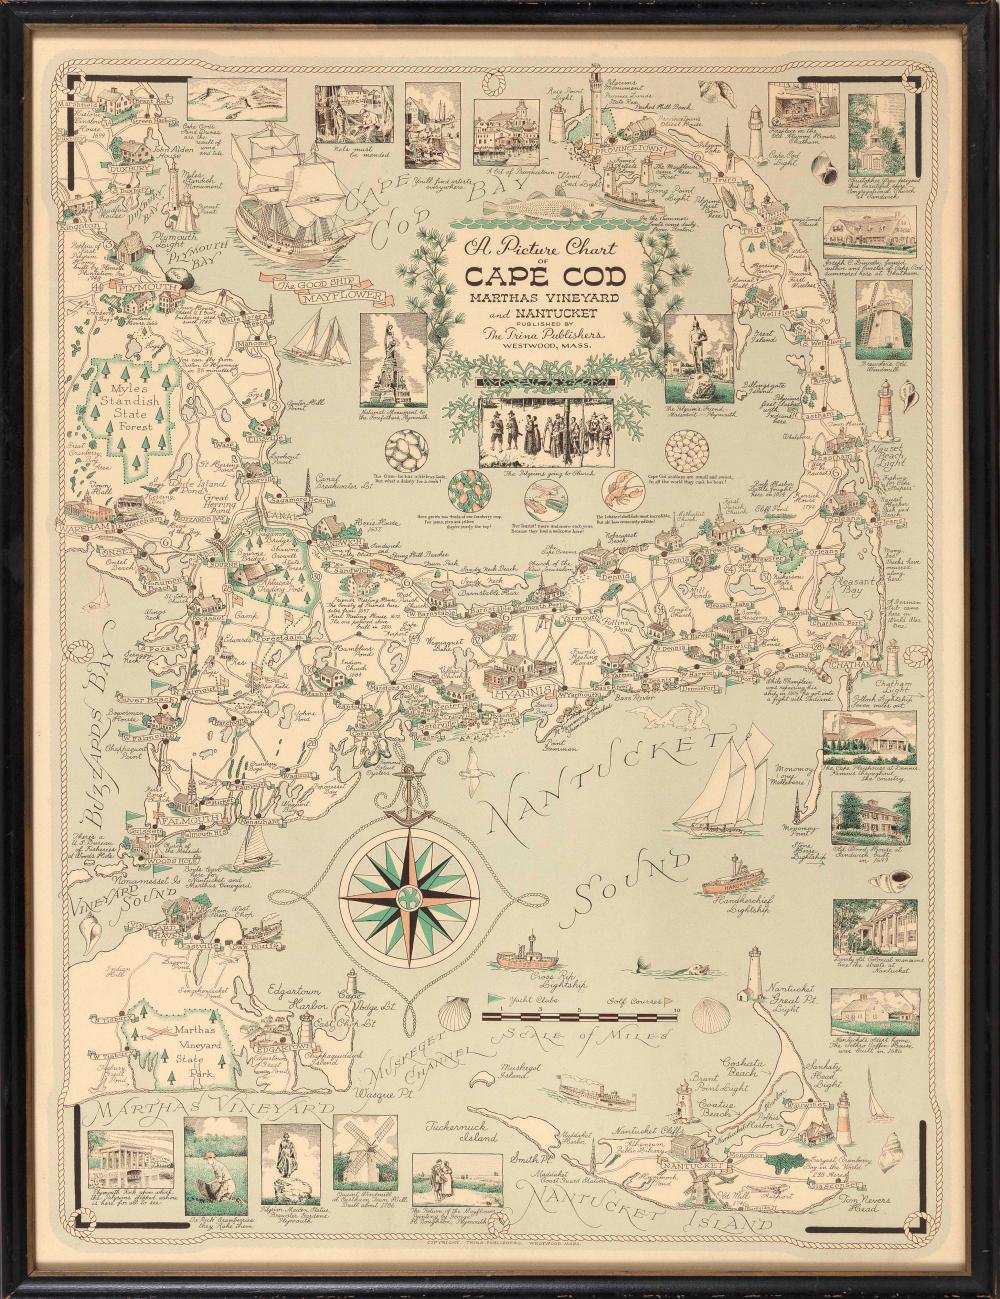  A PICTURE CHART OF CAPE COD MARTHA S 34d738